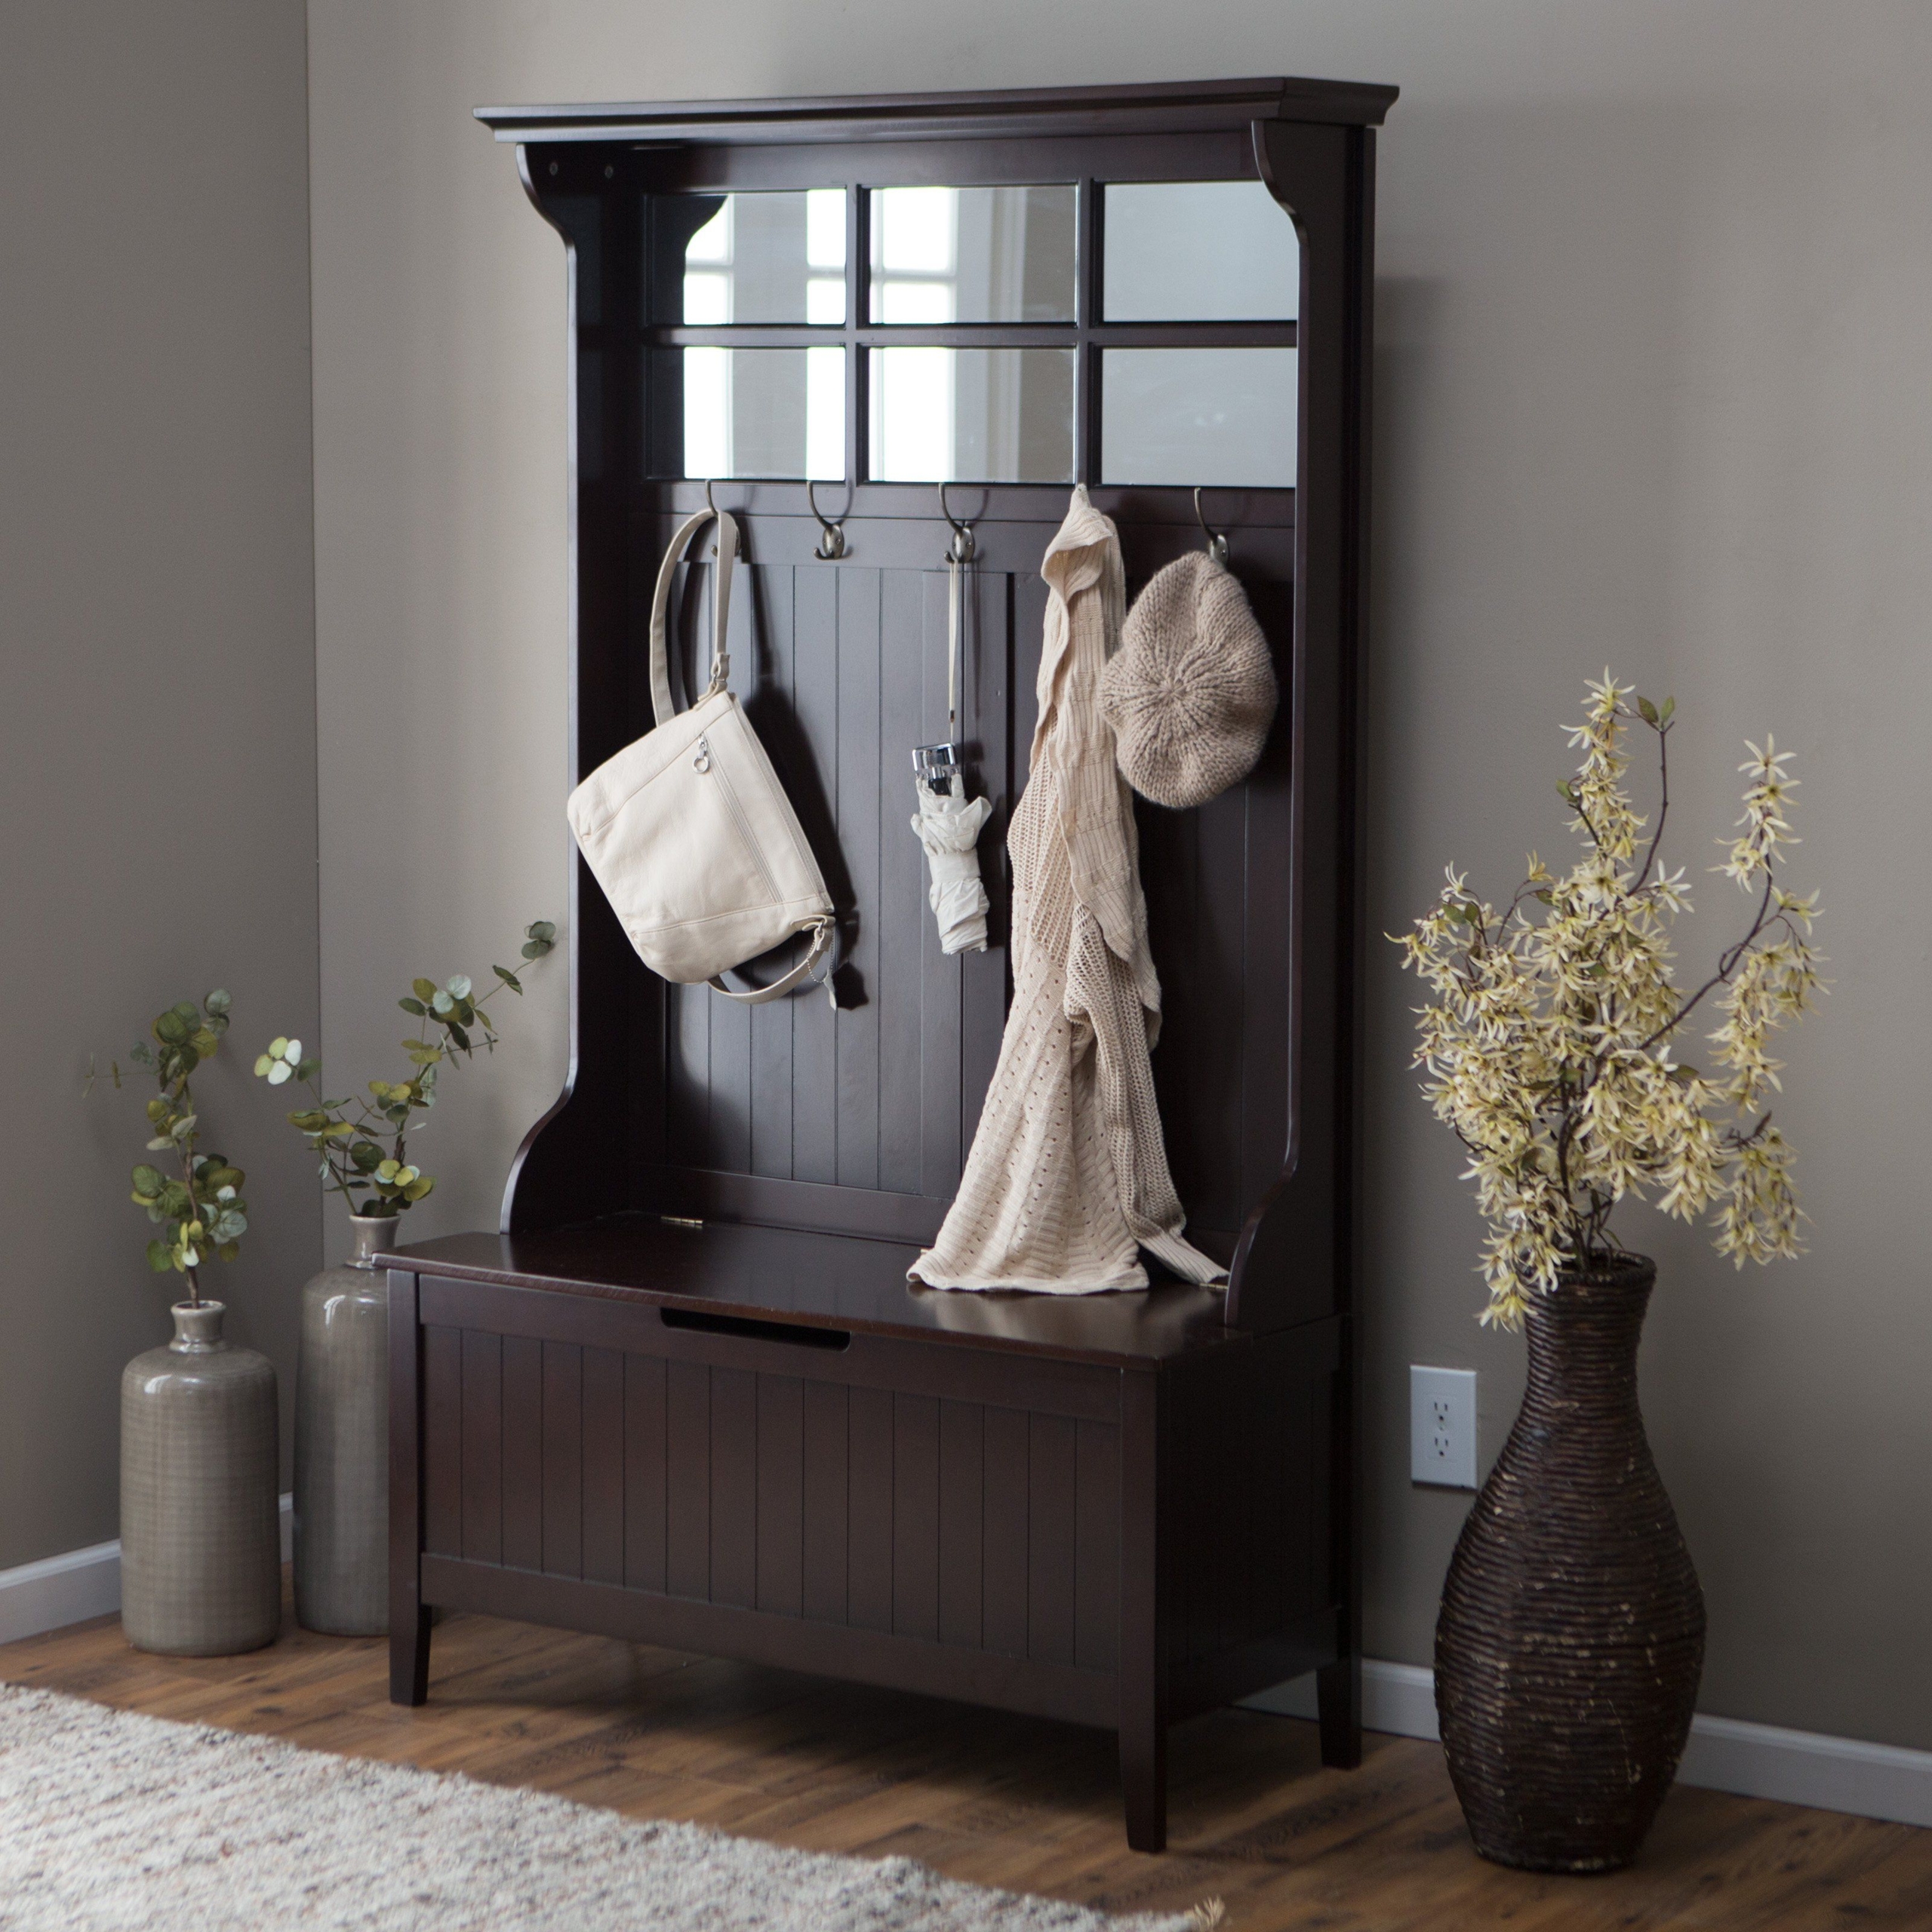 Belham Living Richland Hall Tree in Espresso Has Five Double Hooks Are the Perfect Place to Hang Coats, Hats, and Scarves, While the Lift Top Storage Bench Stores Blankets, Throws, and Pillows. Use in a Mudroom or Entryway. Mirrored and Beaded Detail